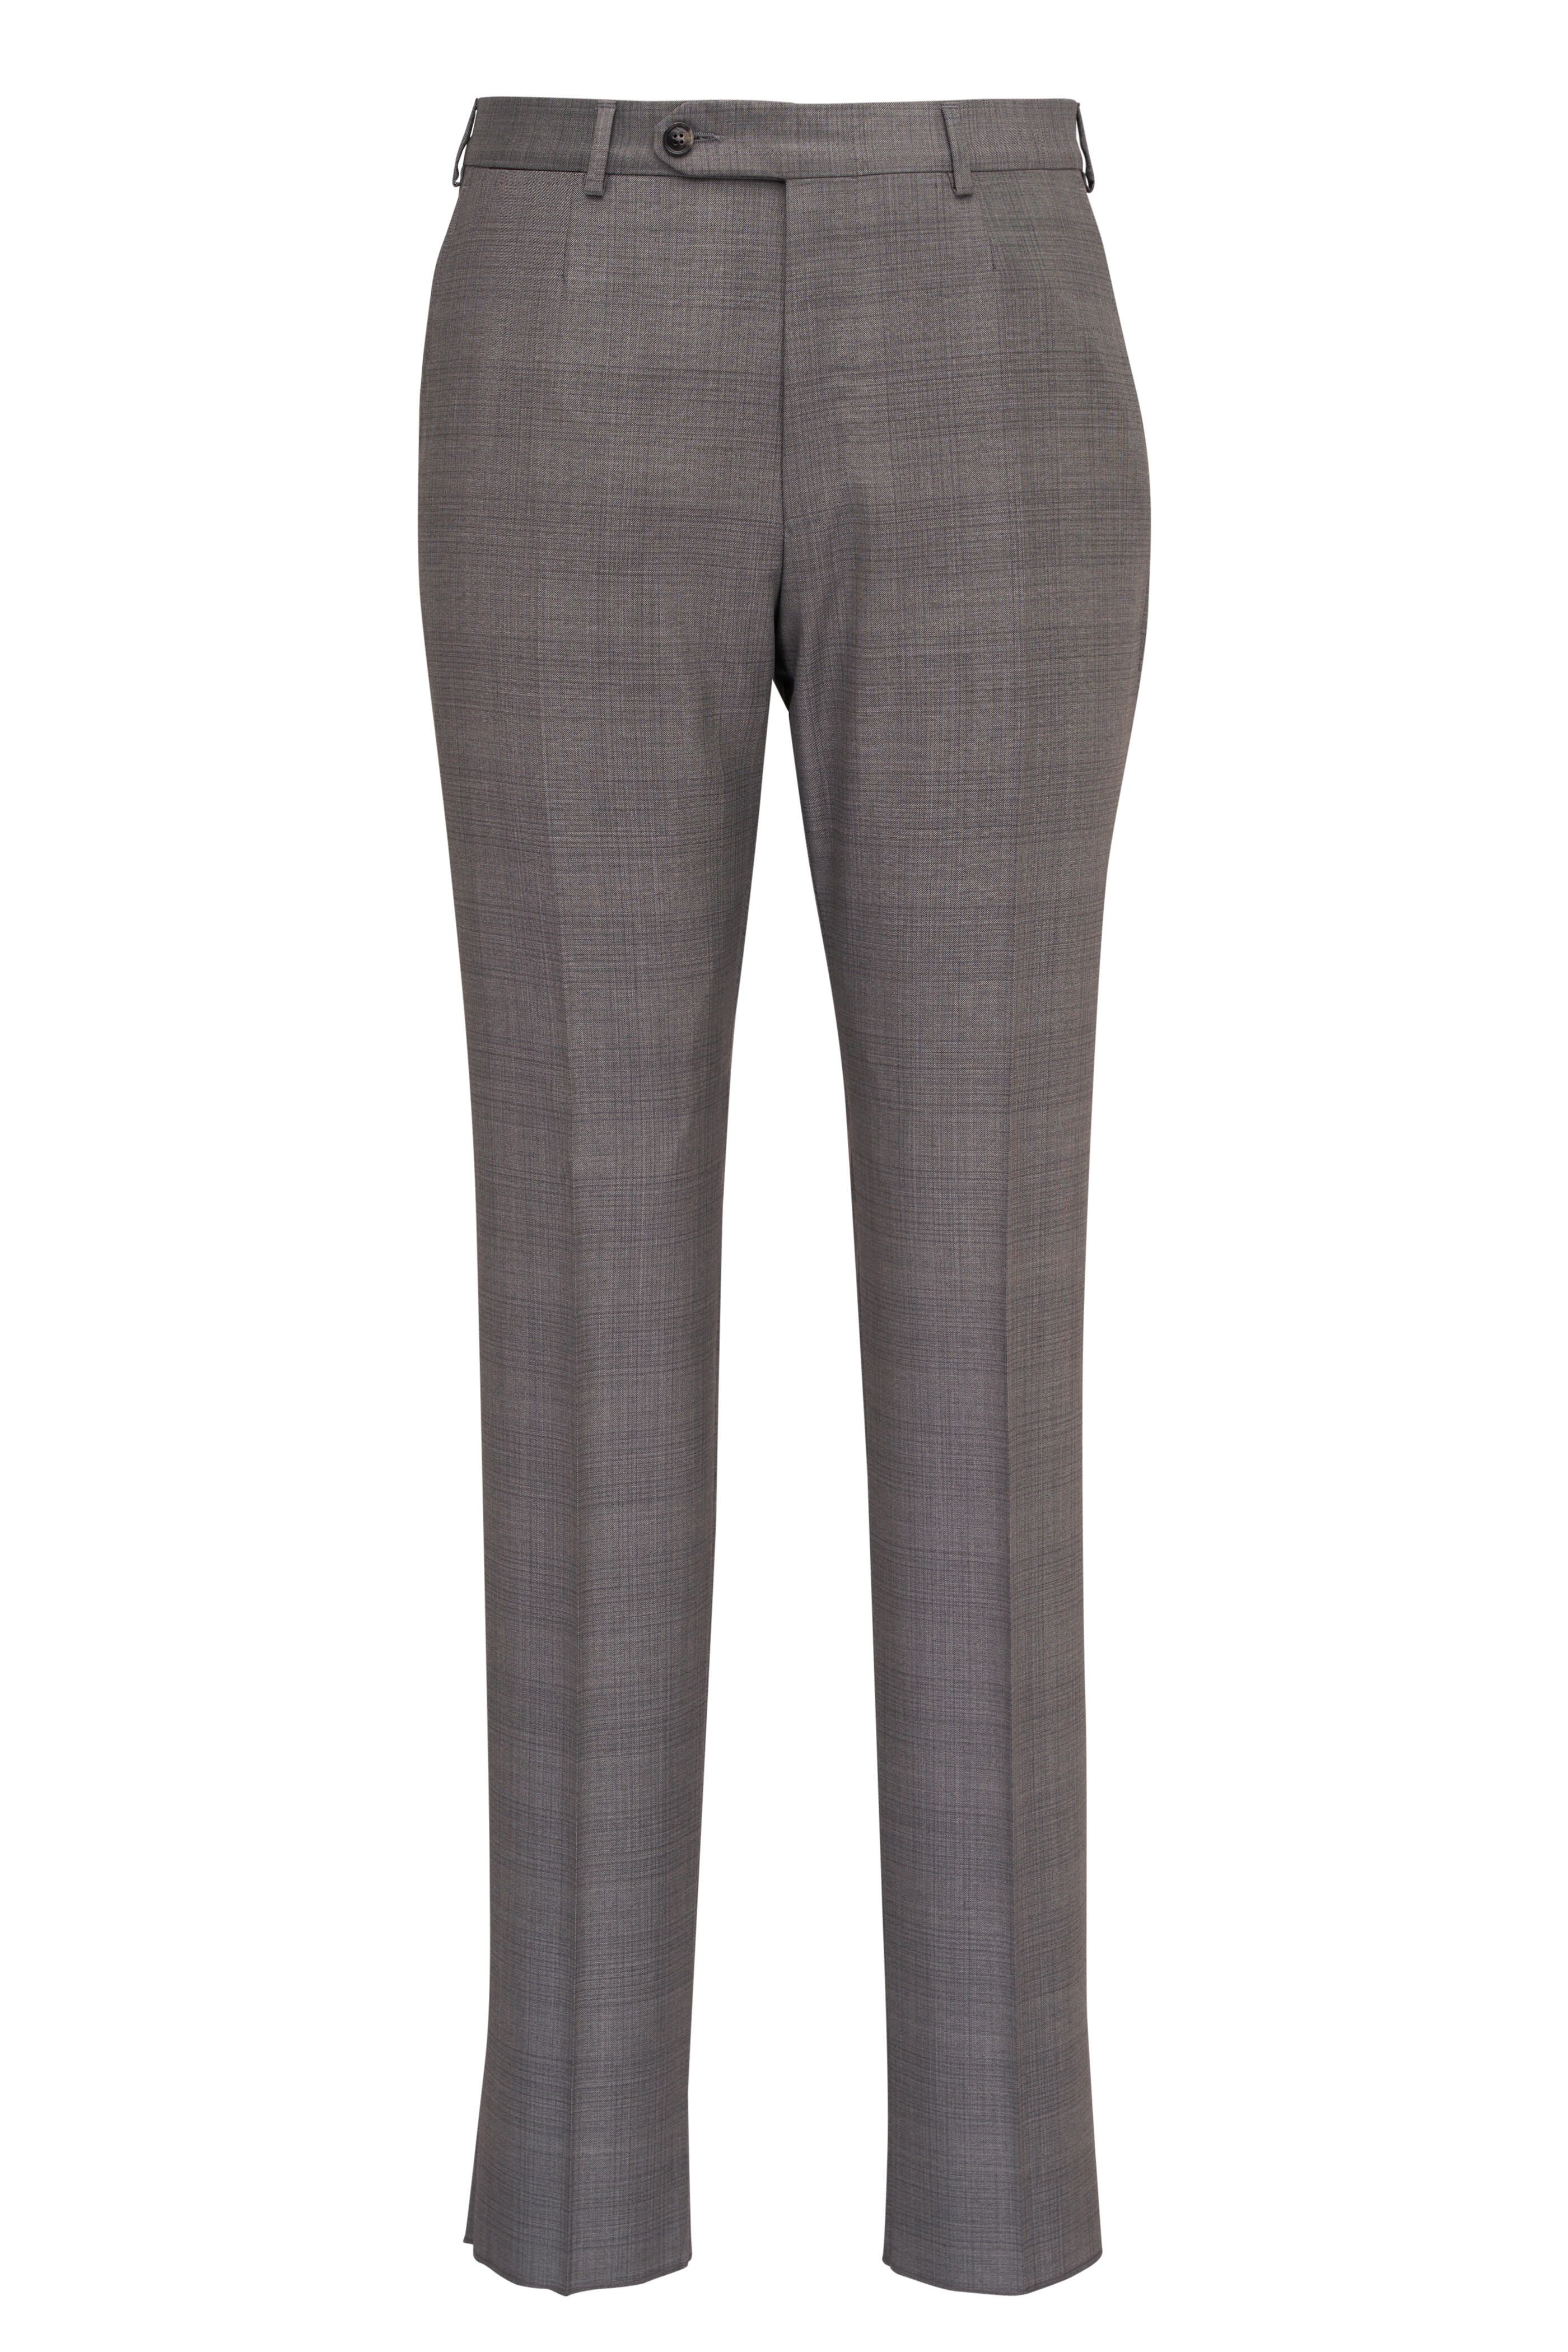 Zegna - Light Gray Tonal Wool Suit | Mitchell Stores